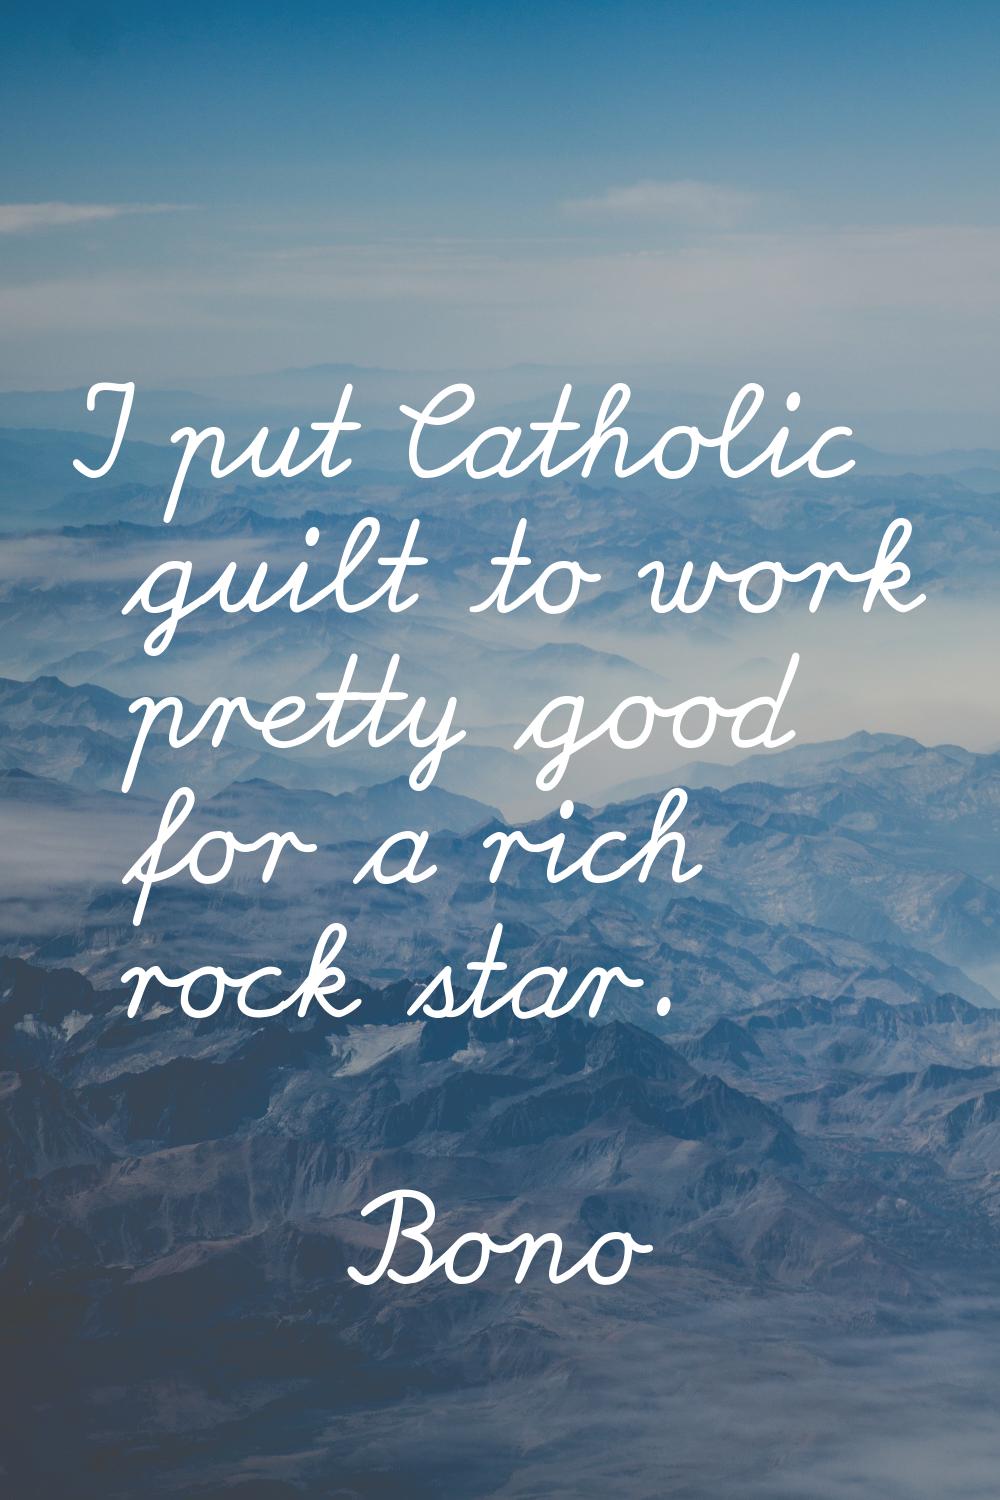 I put Catholic guilt to work pretty good for a rich rock star.